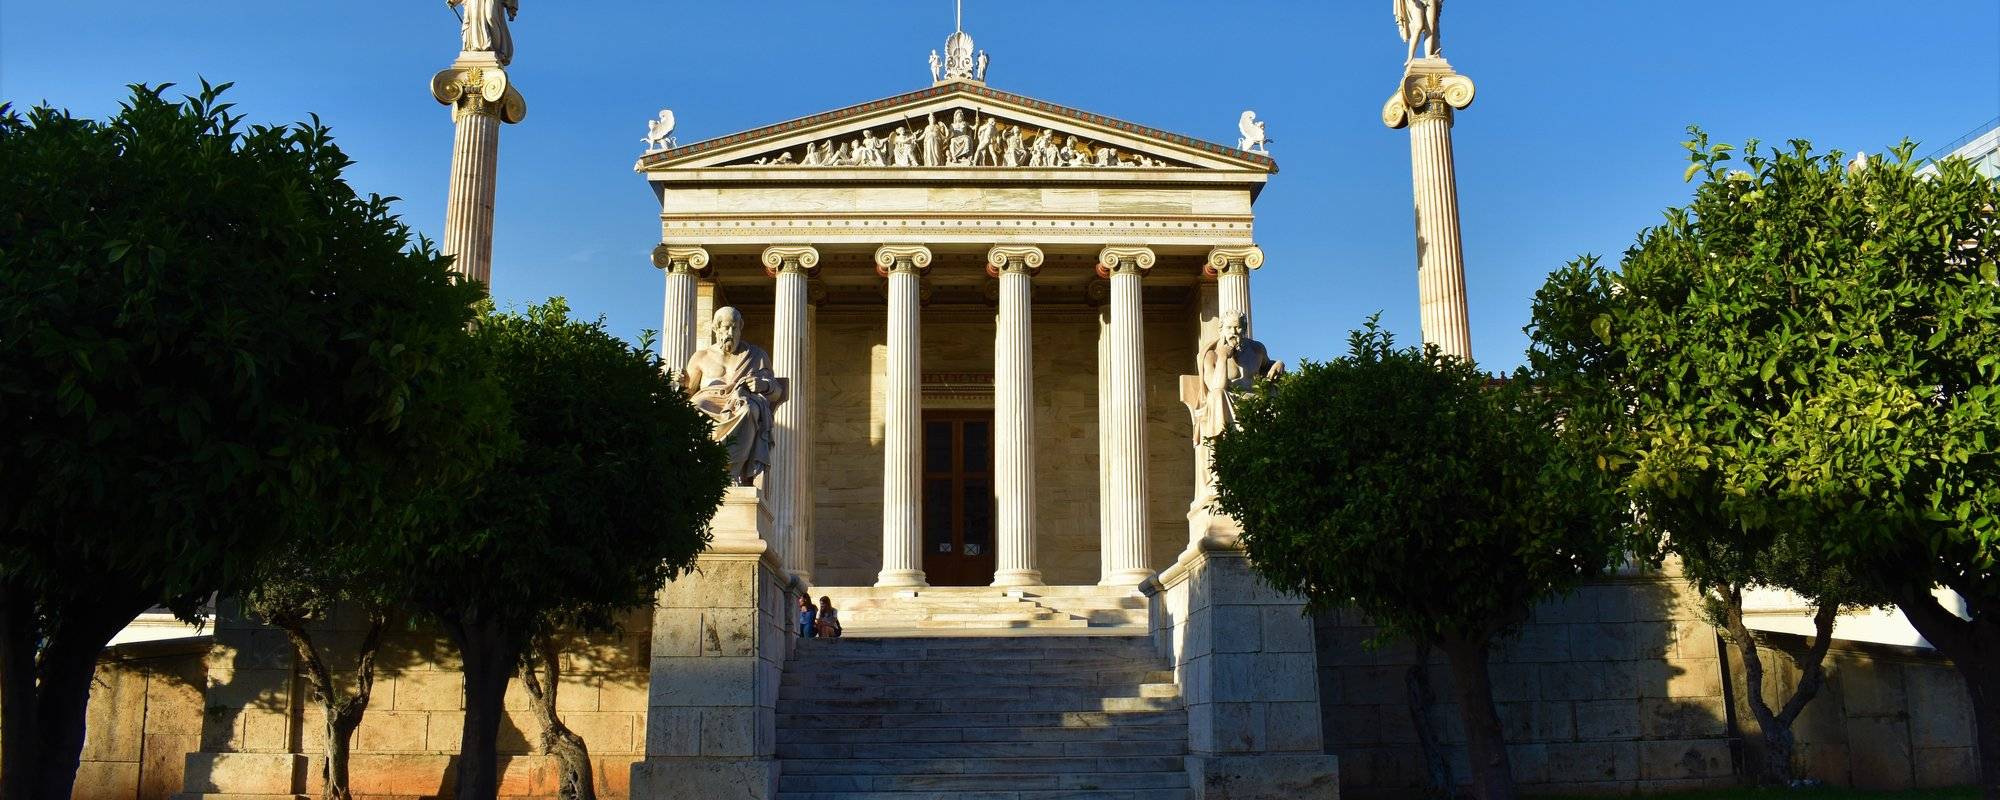 The neoclassical architectural trilogy of Athens.
